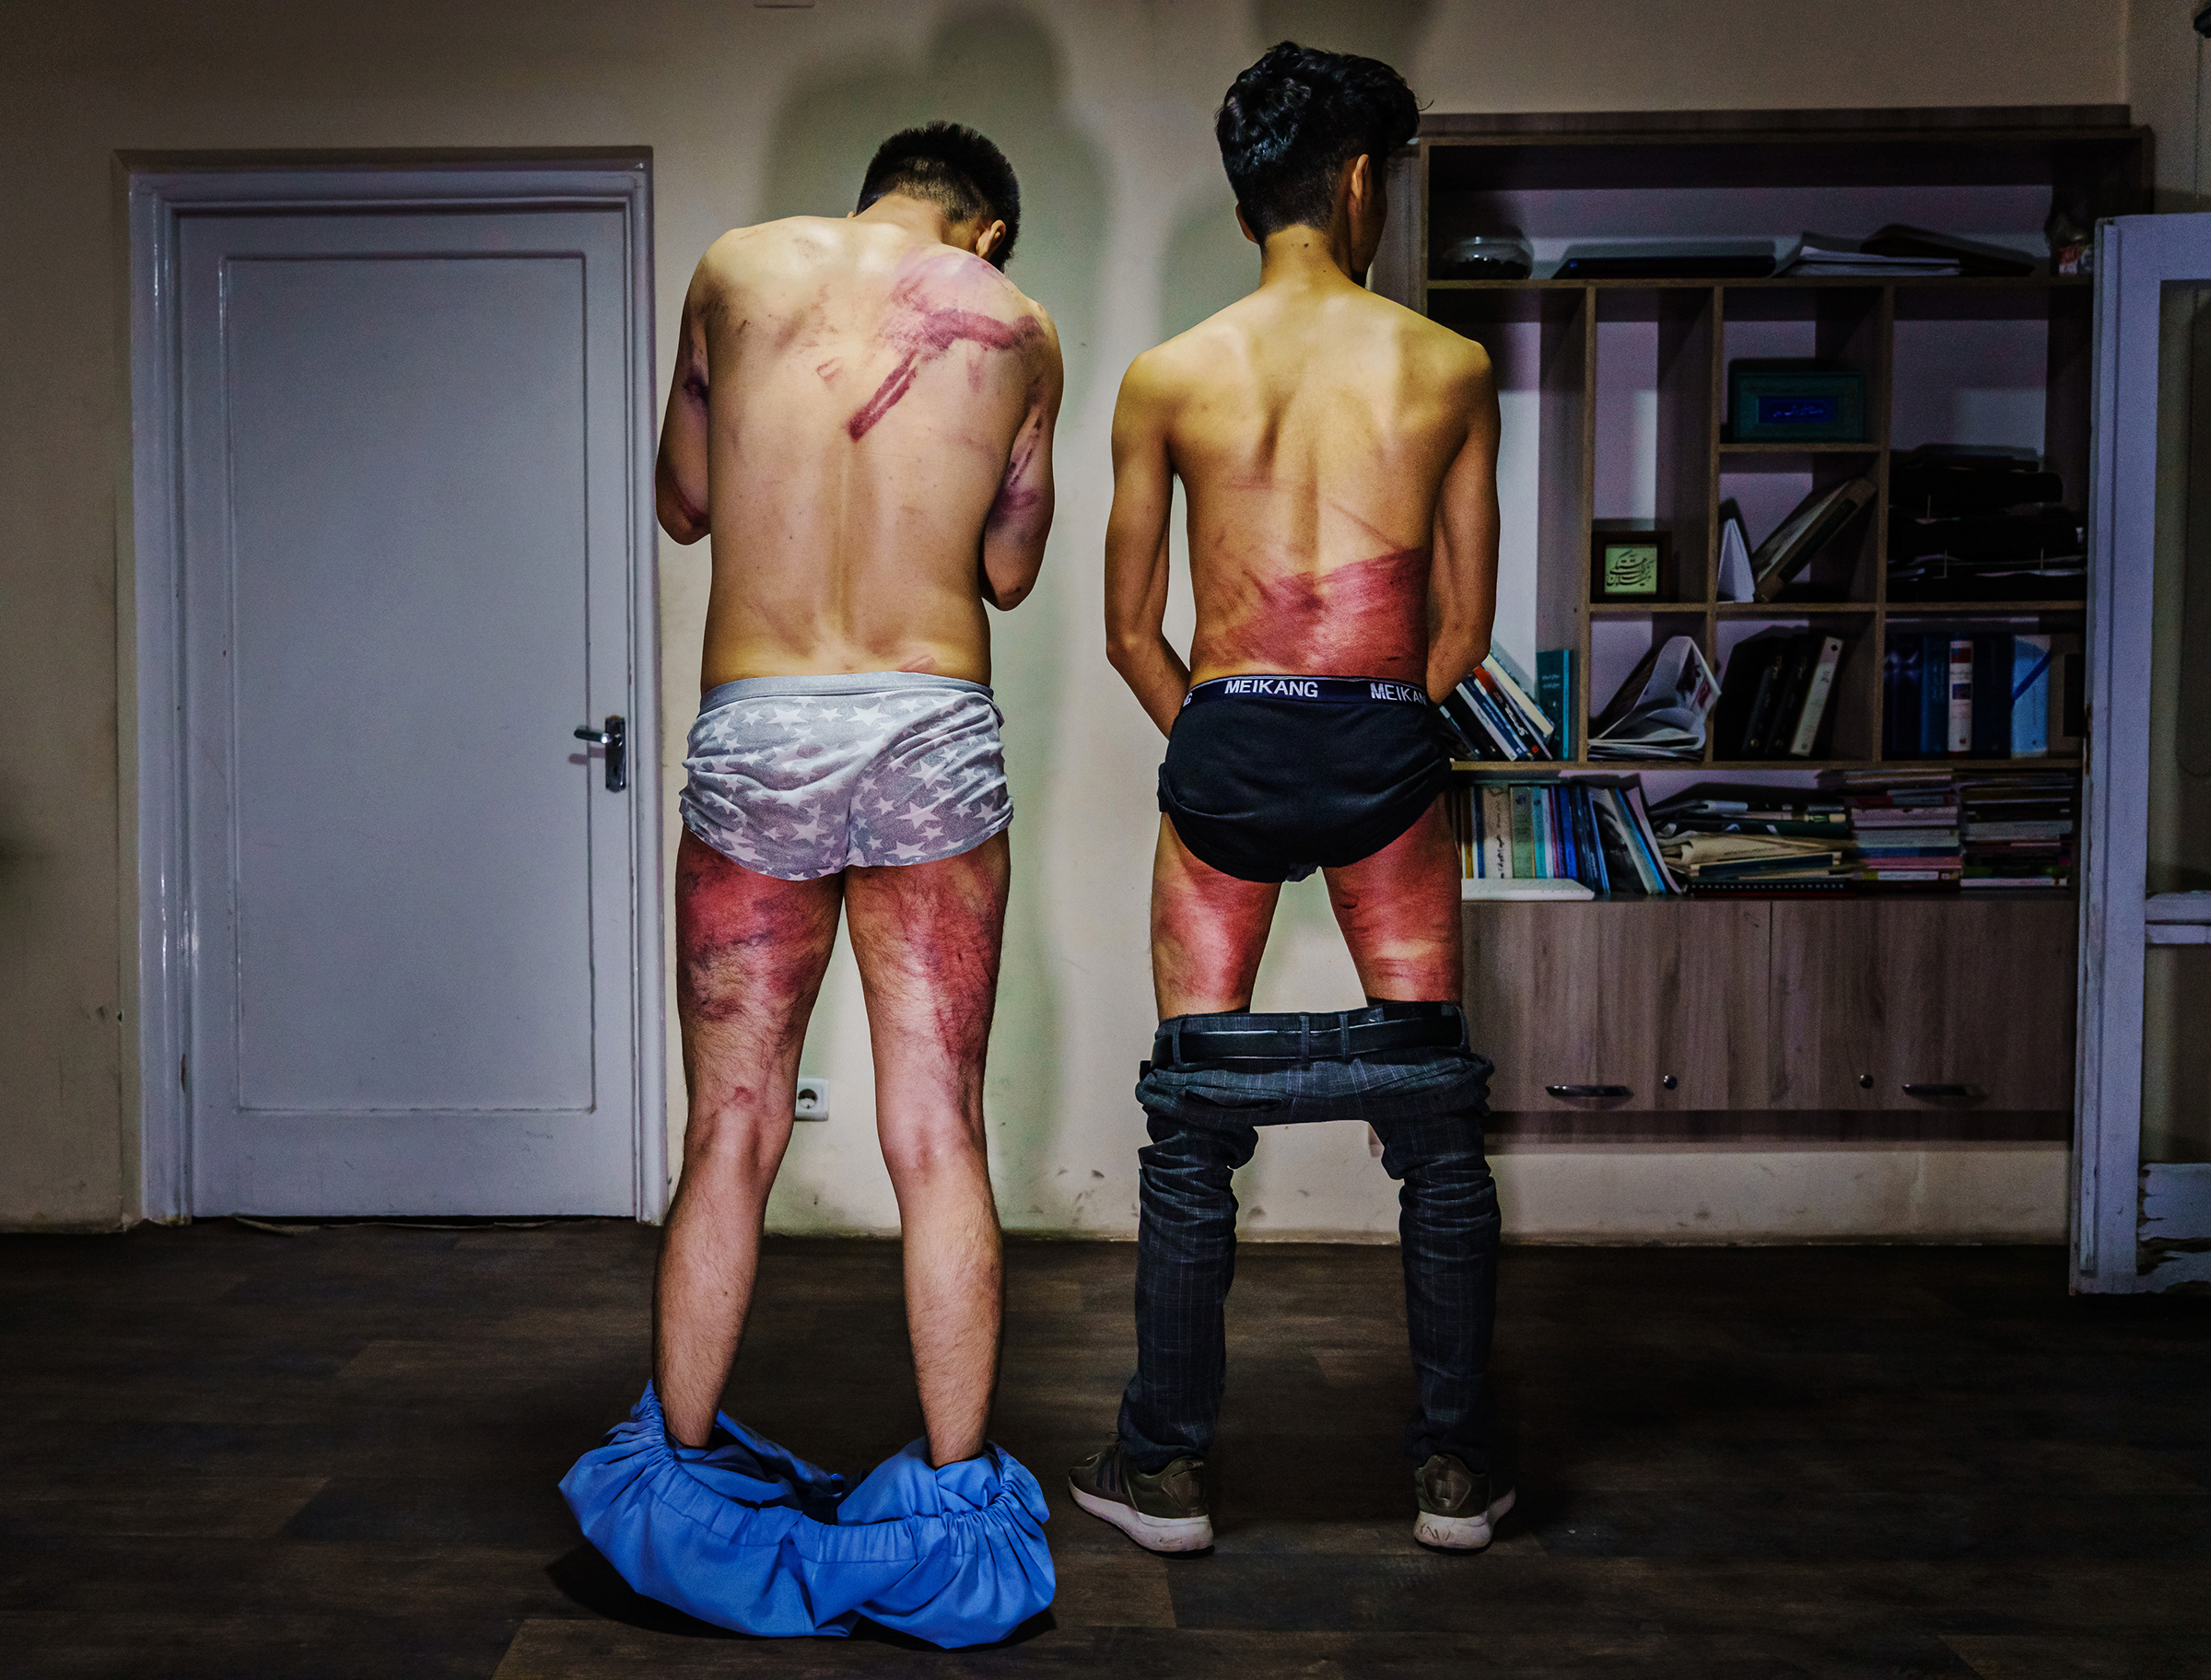 Journalists from the Etilaatroz newspaper, Nemat Naqdi, 28, left and Taqi Daryabi, 22, undress to show their wounds after they were arrested for reporting on a women's rights protest, then tortured and beaten by Taliban fighters, in Kabul on Sept. 8.